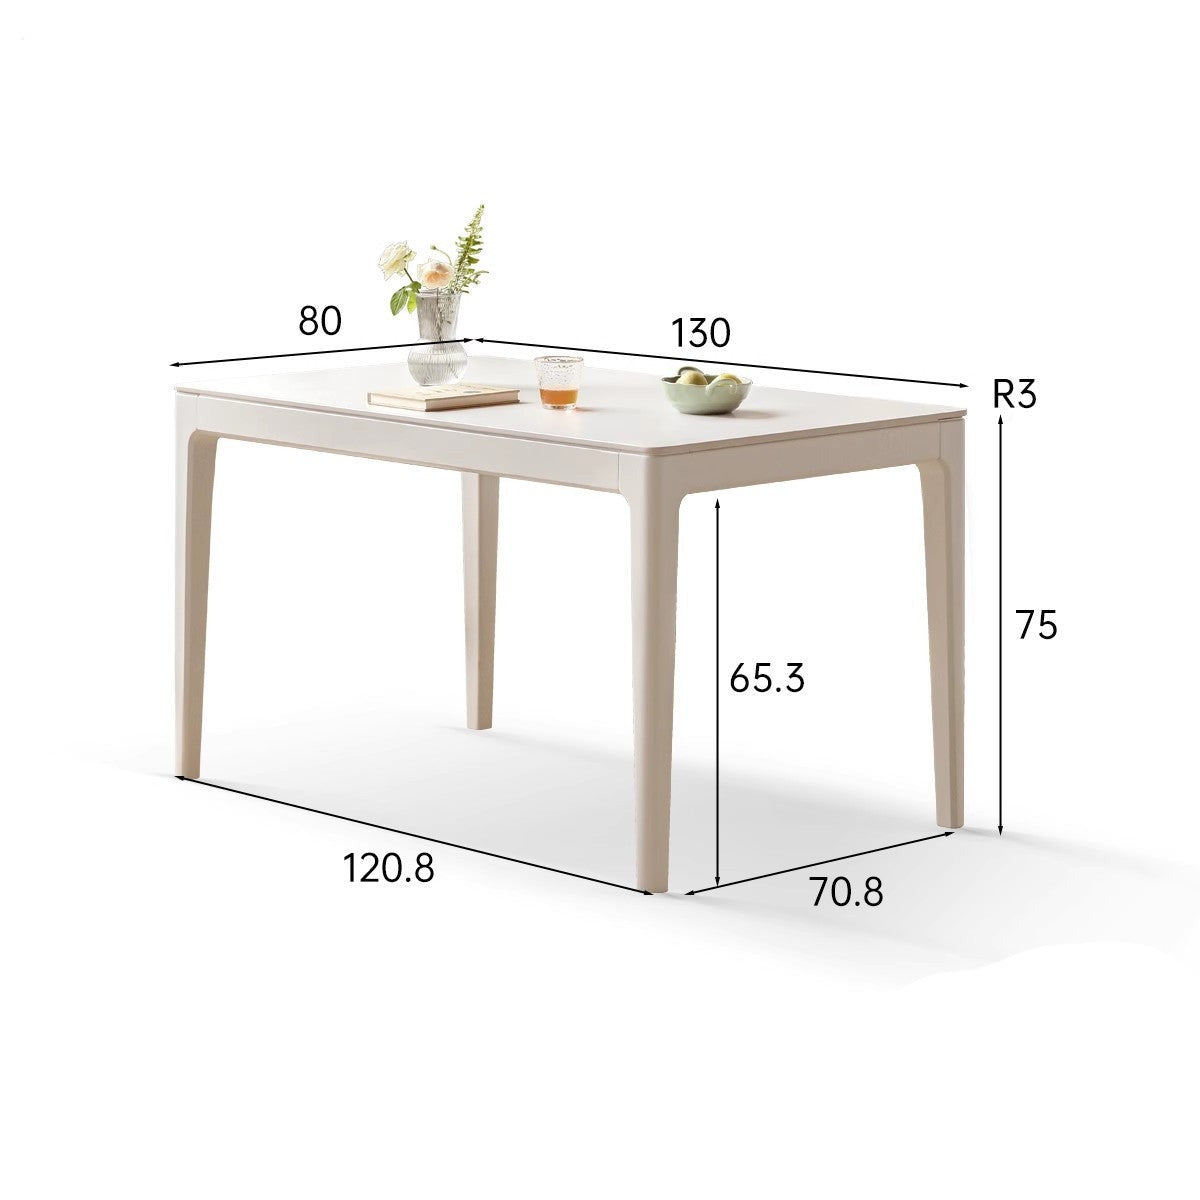 Birch Solid Wood Rock Plate Dining Table White Cream